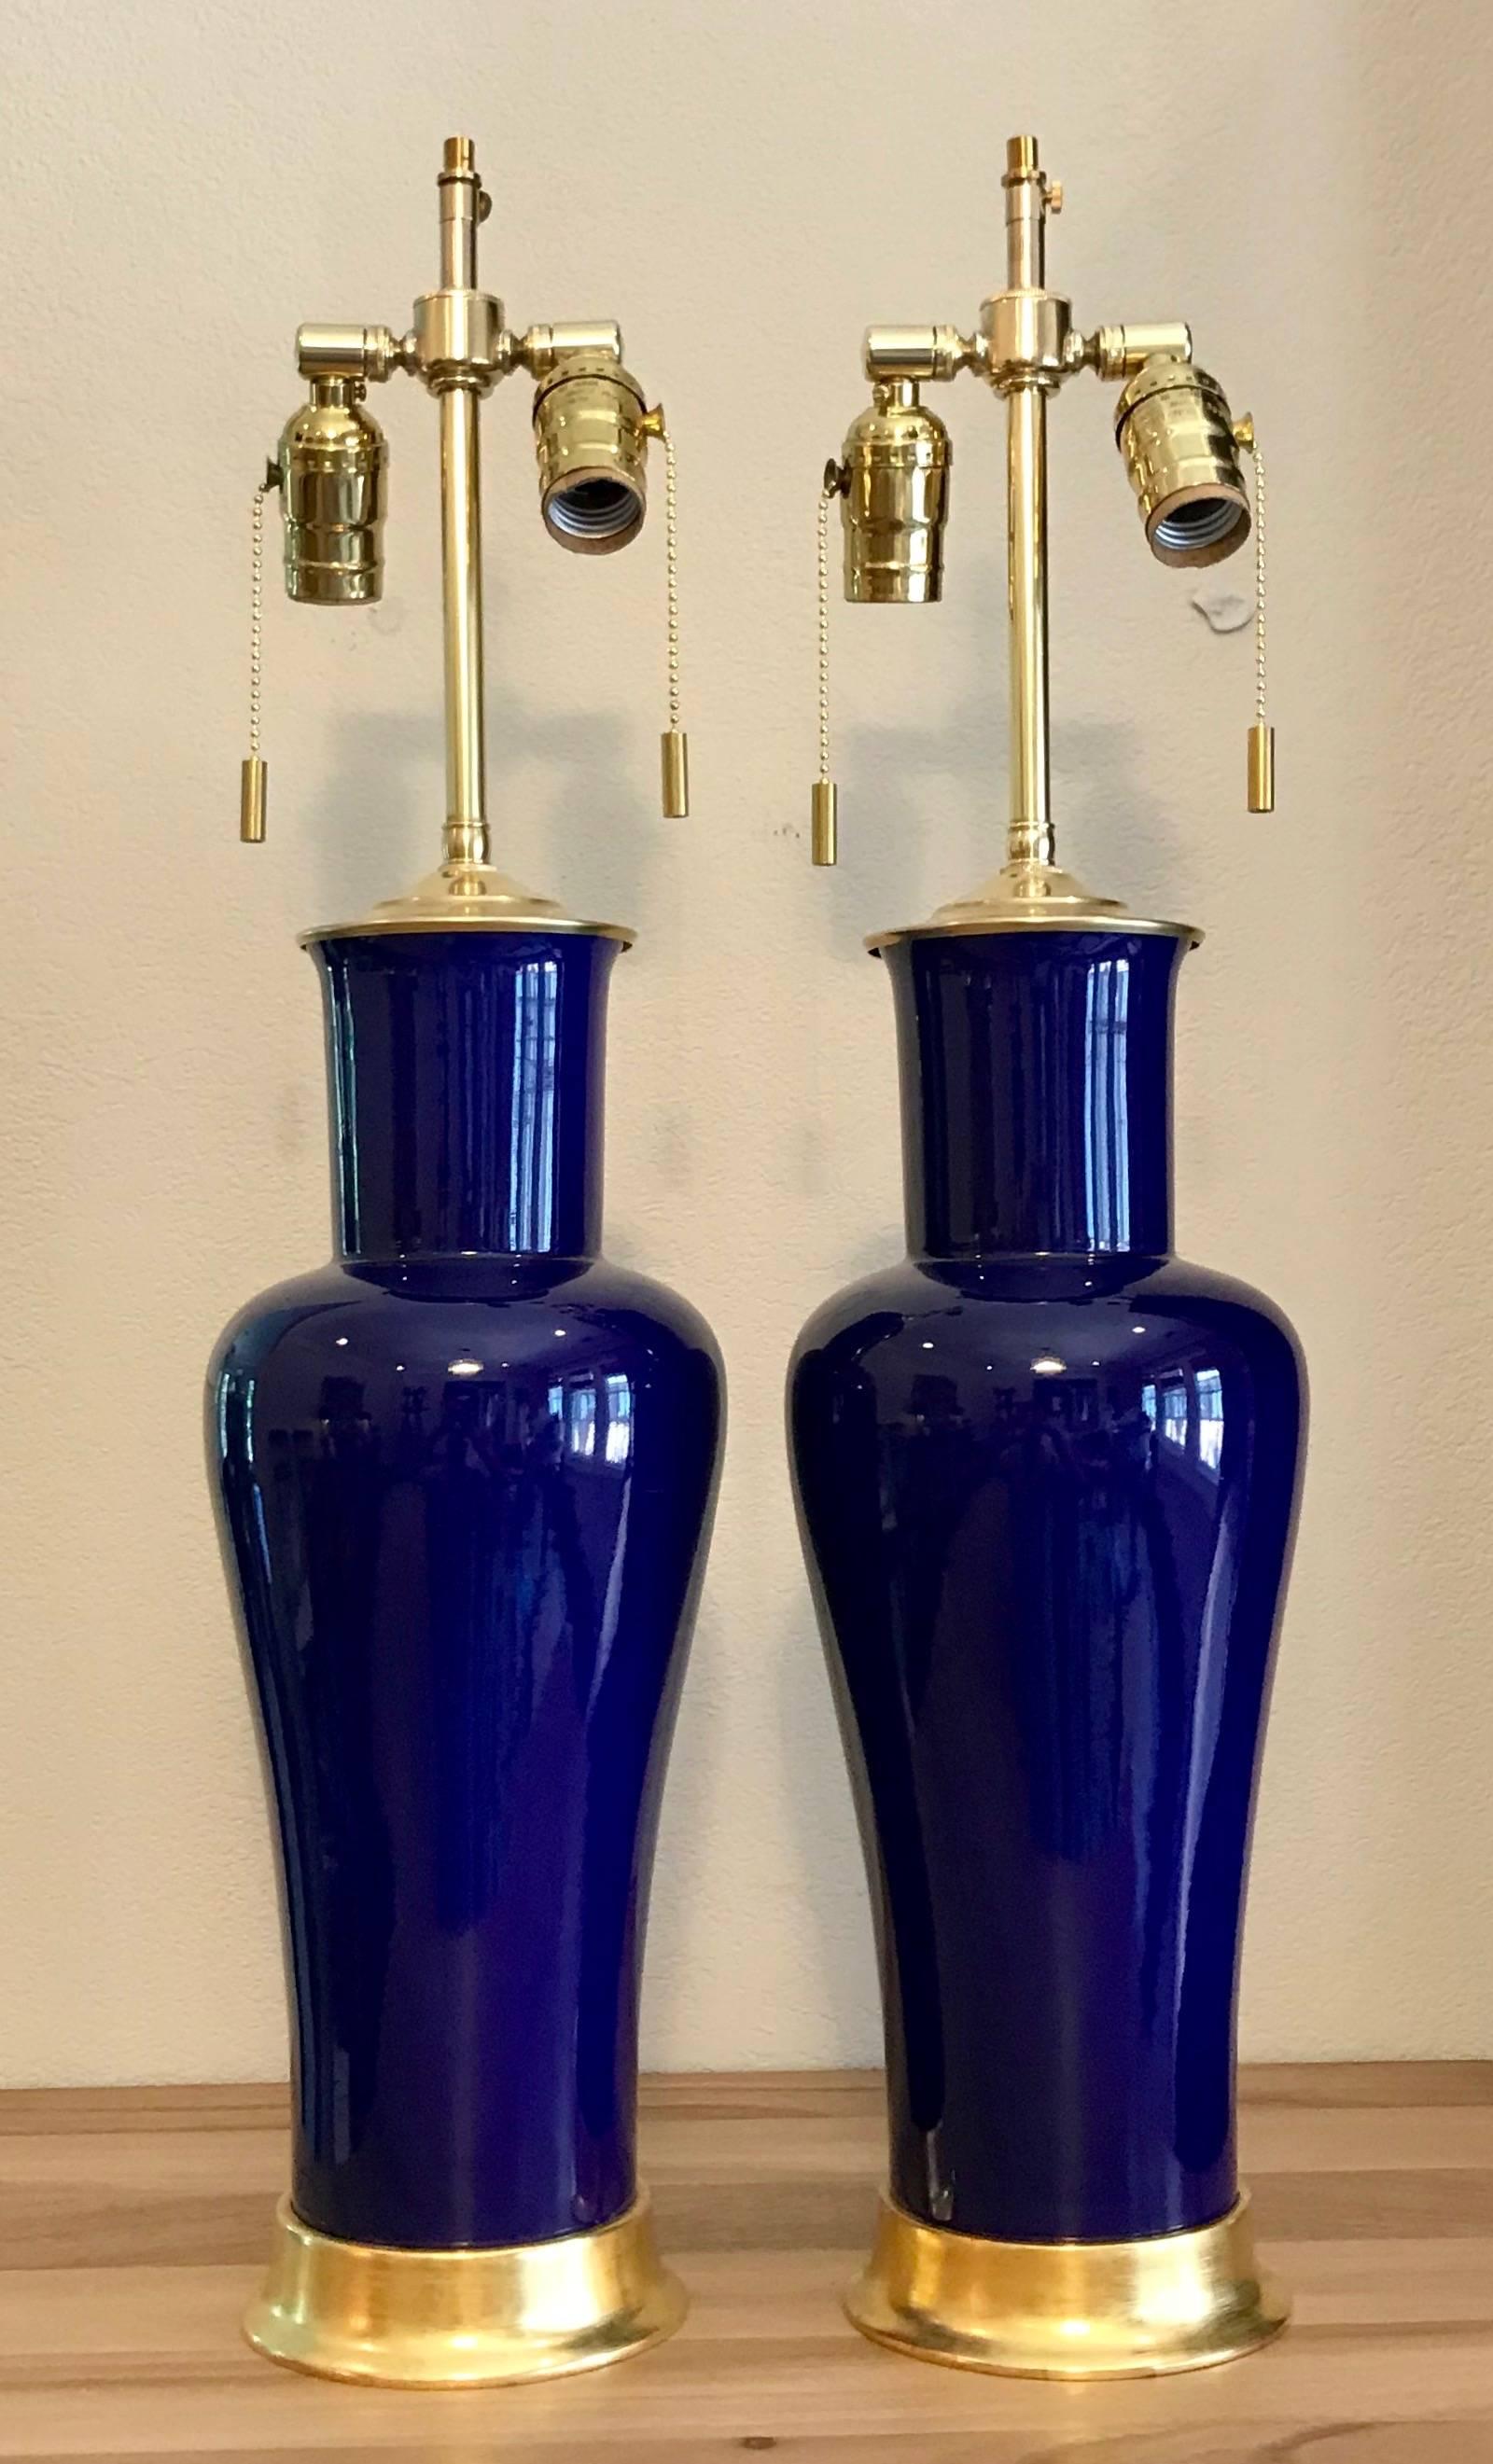 Pair of beautifully crafted porcelain lamps in a vibrant cobalt blue with reflective glaze. Mounted on custom 23 karat water gilt turned wood bases. Wired for US with on/off pull chain sockets, brass fittings and French style rayon covered twisted